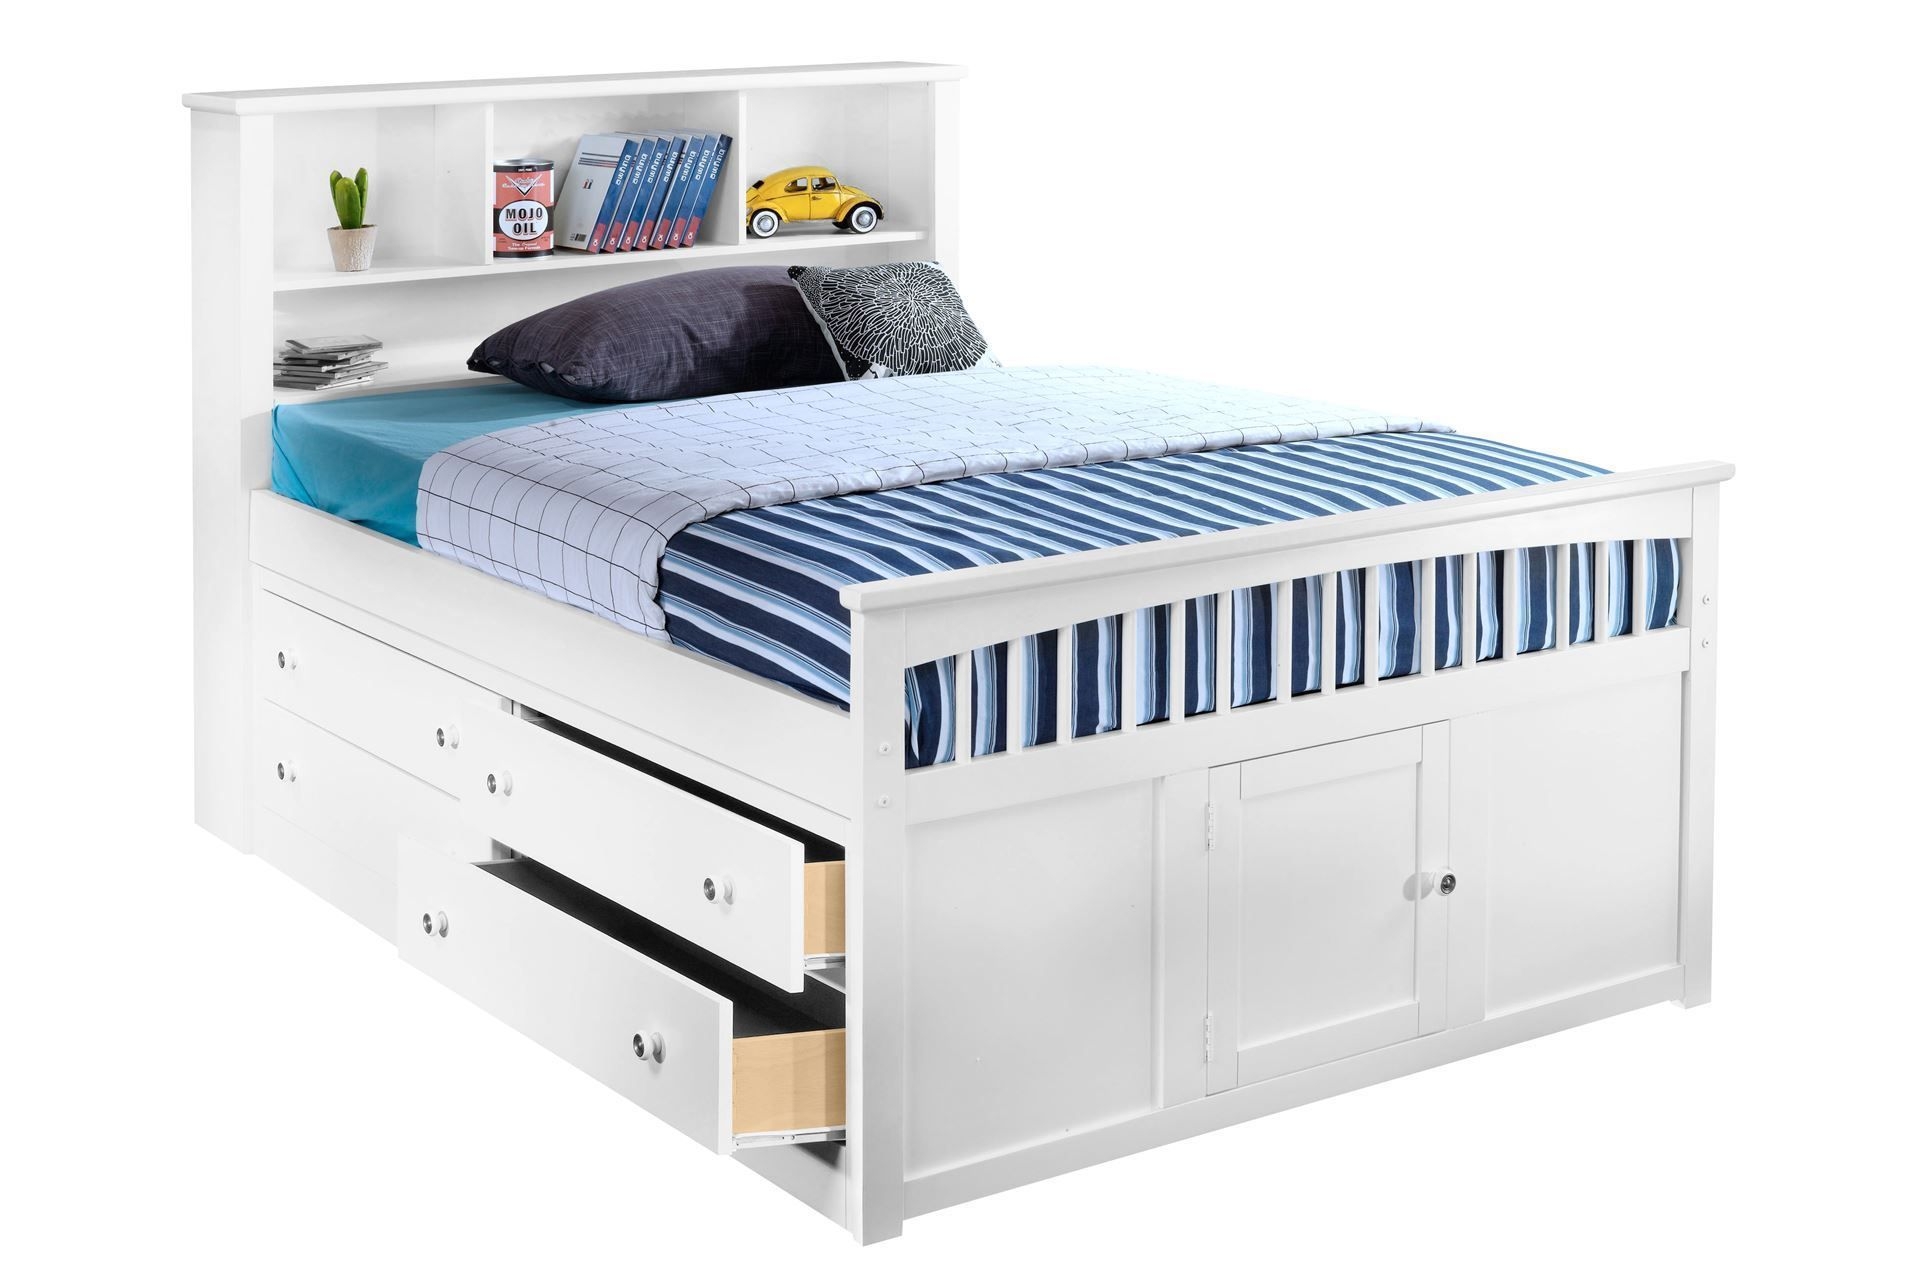 Full size beds for kids 2